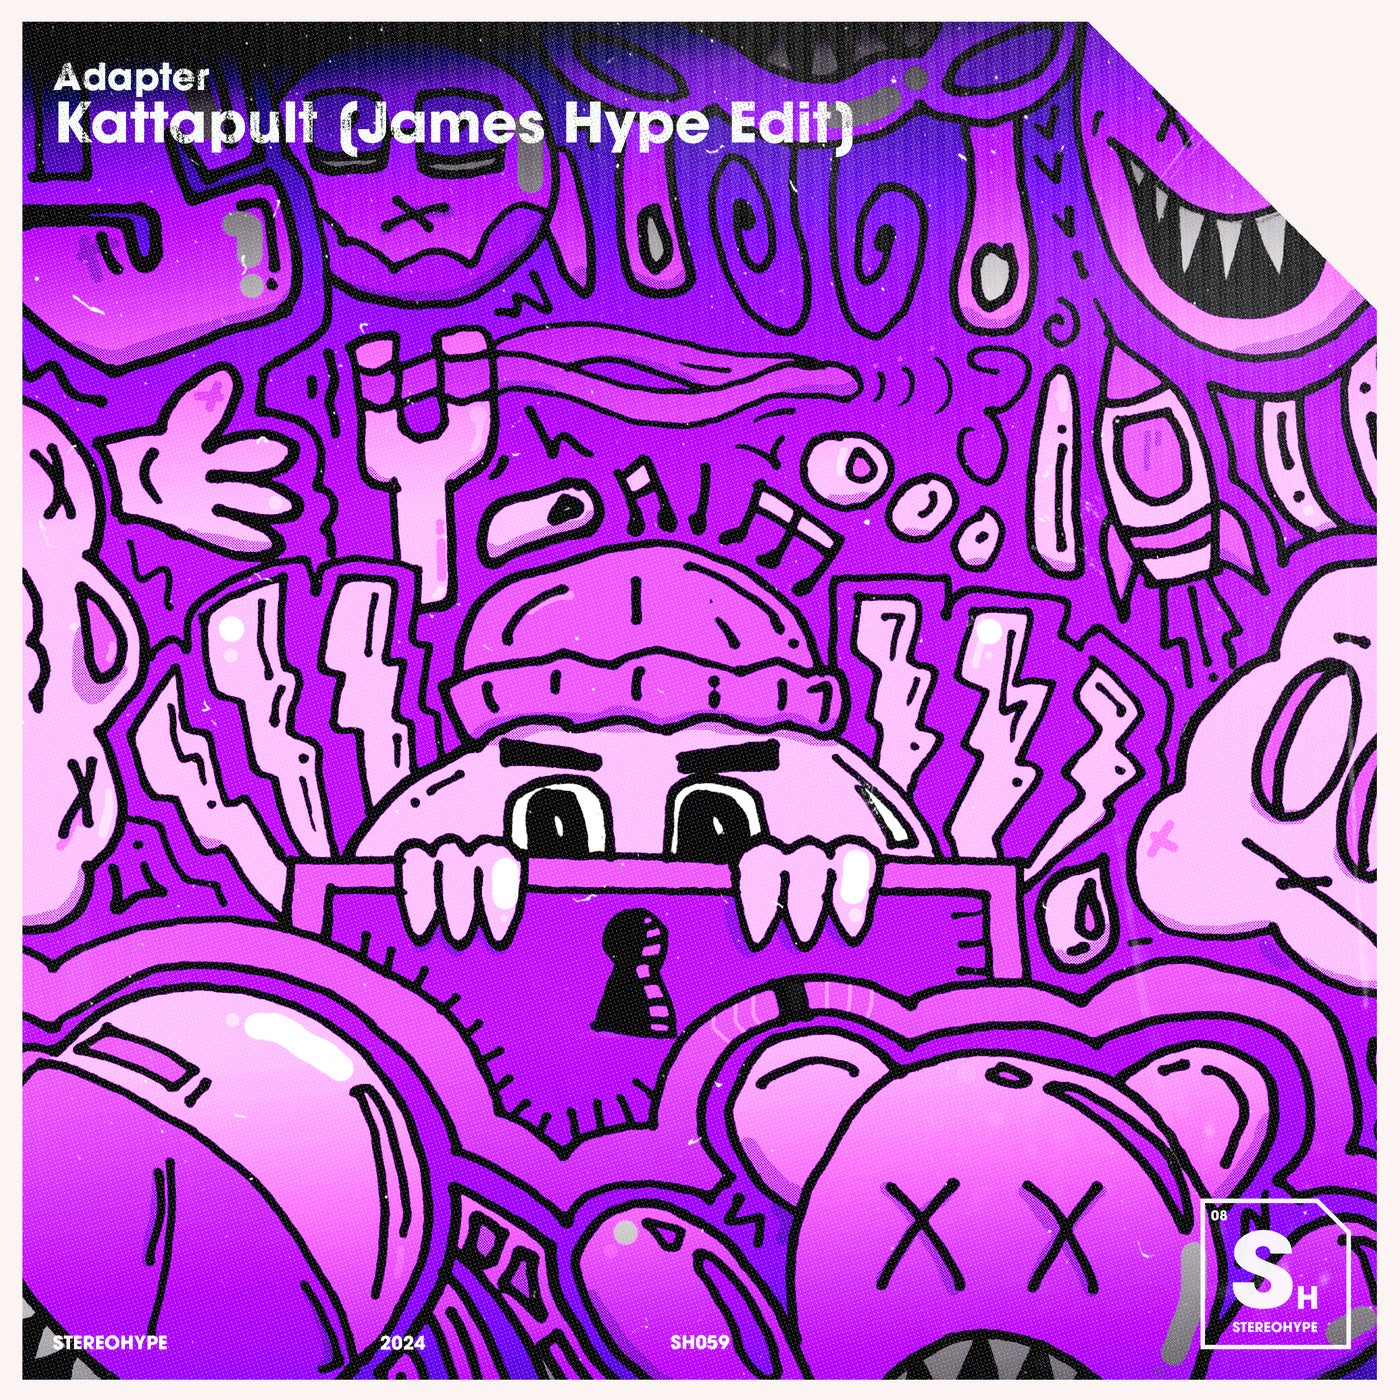 image cover: Adapter - Kattapult (James Hype Edit) [Extended Mix] on STEREOHYPE